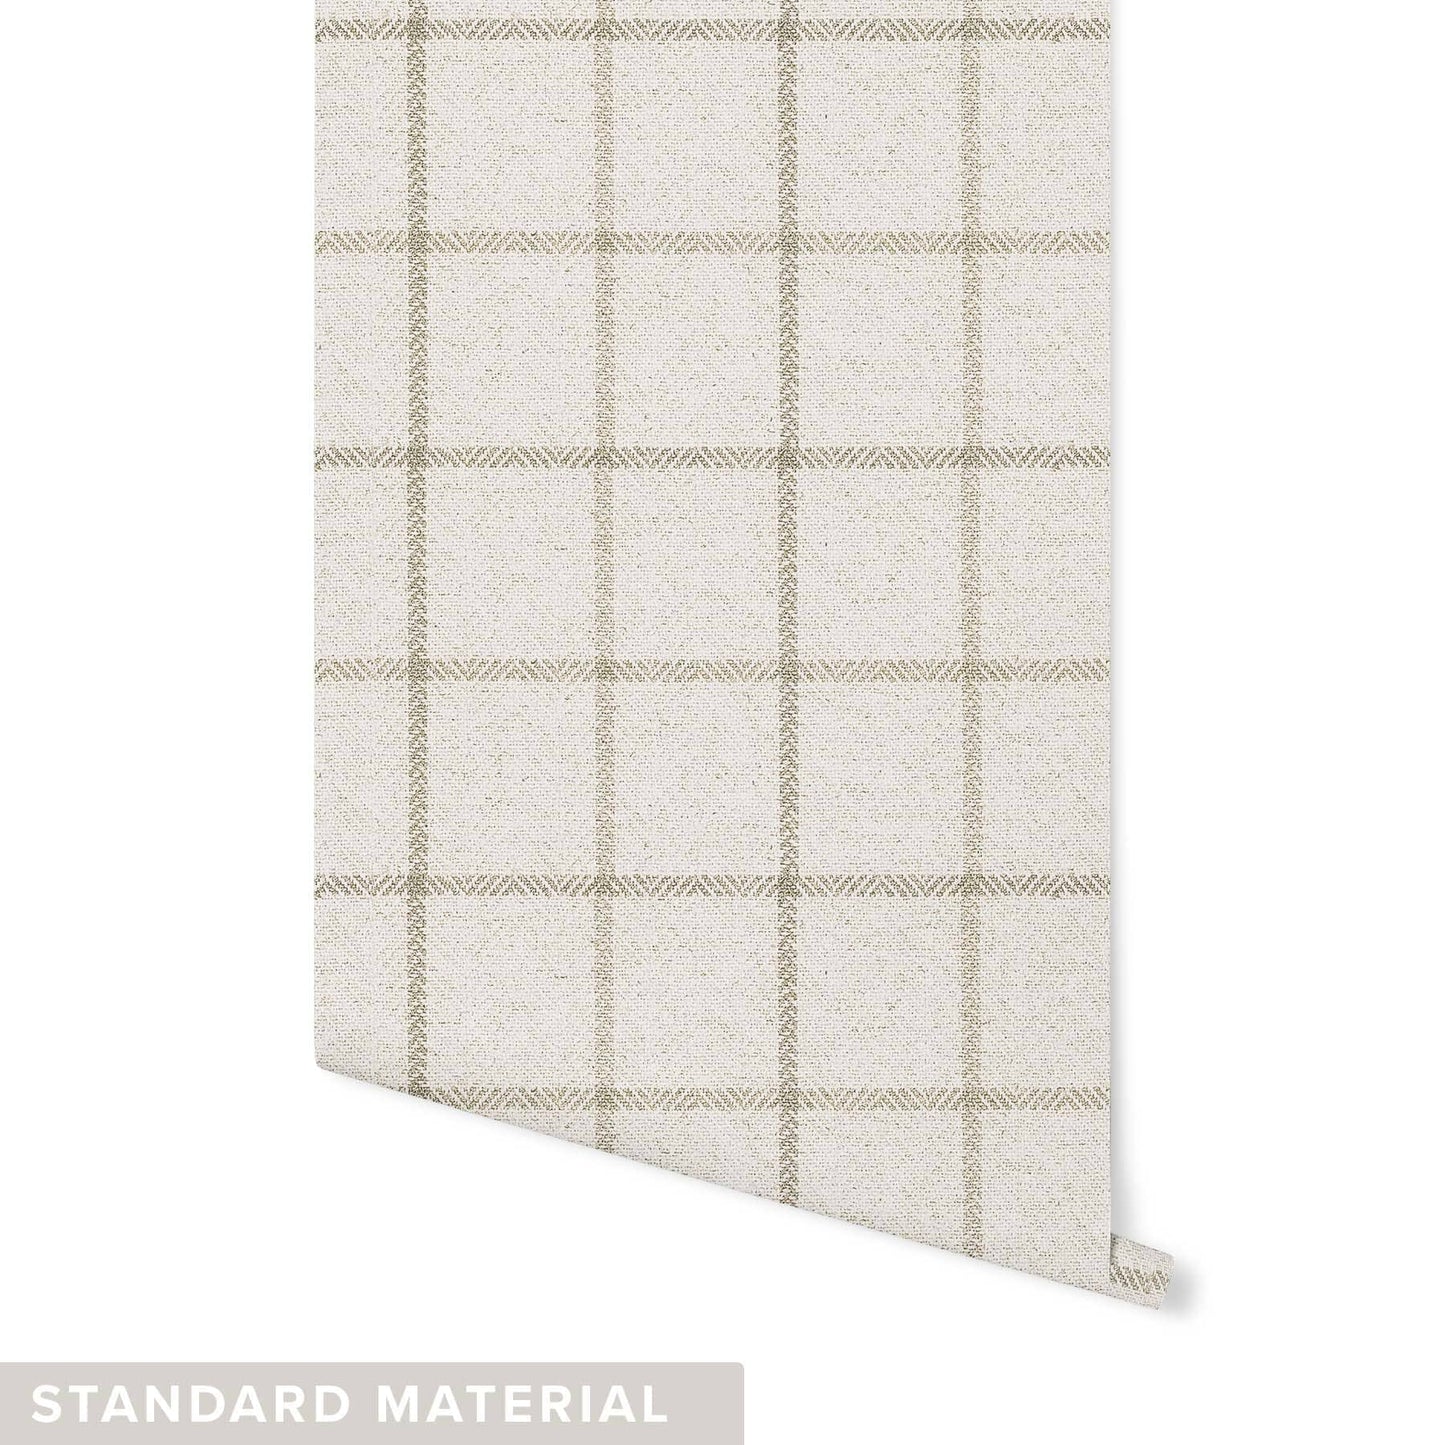 Country Plaid Wallpaper Wallpaper Mia Parres Standard Wall Light Loon DOUBLE ROLL : 46" X 4 FEET